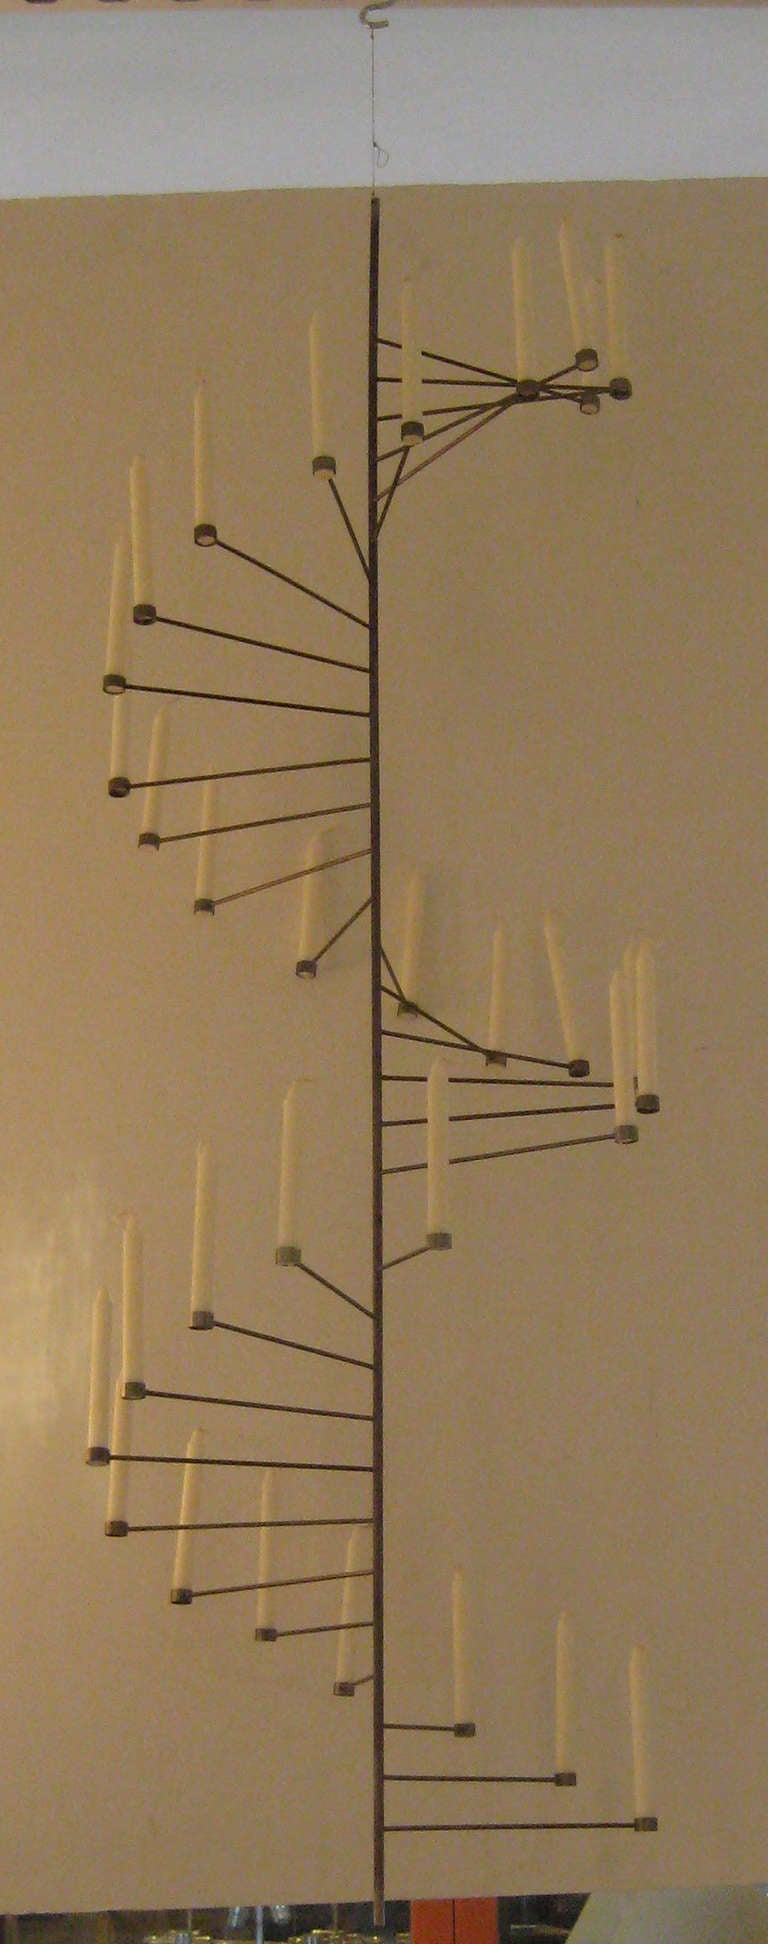 Simple, elegant steel spiral floats from invisible fishing wire. Approximately 200 of the PK-101 were produced between 1959 and 1966 for E Kold Christensen.